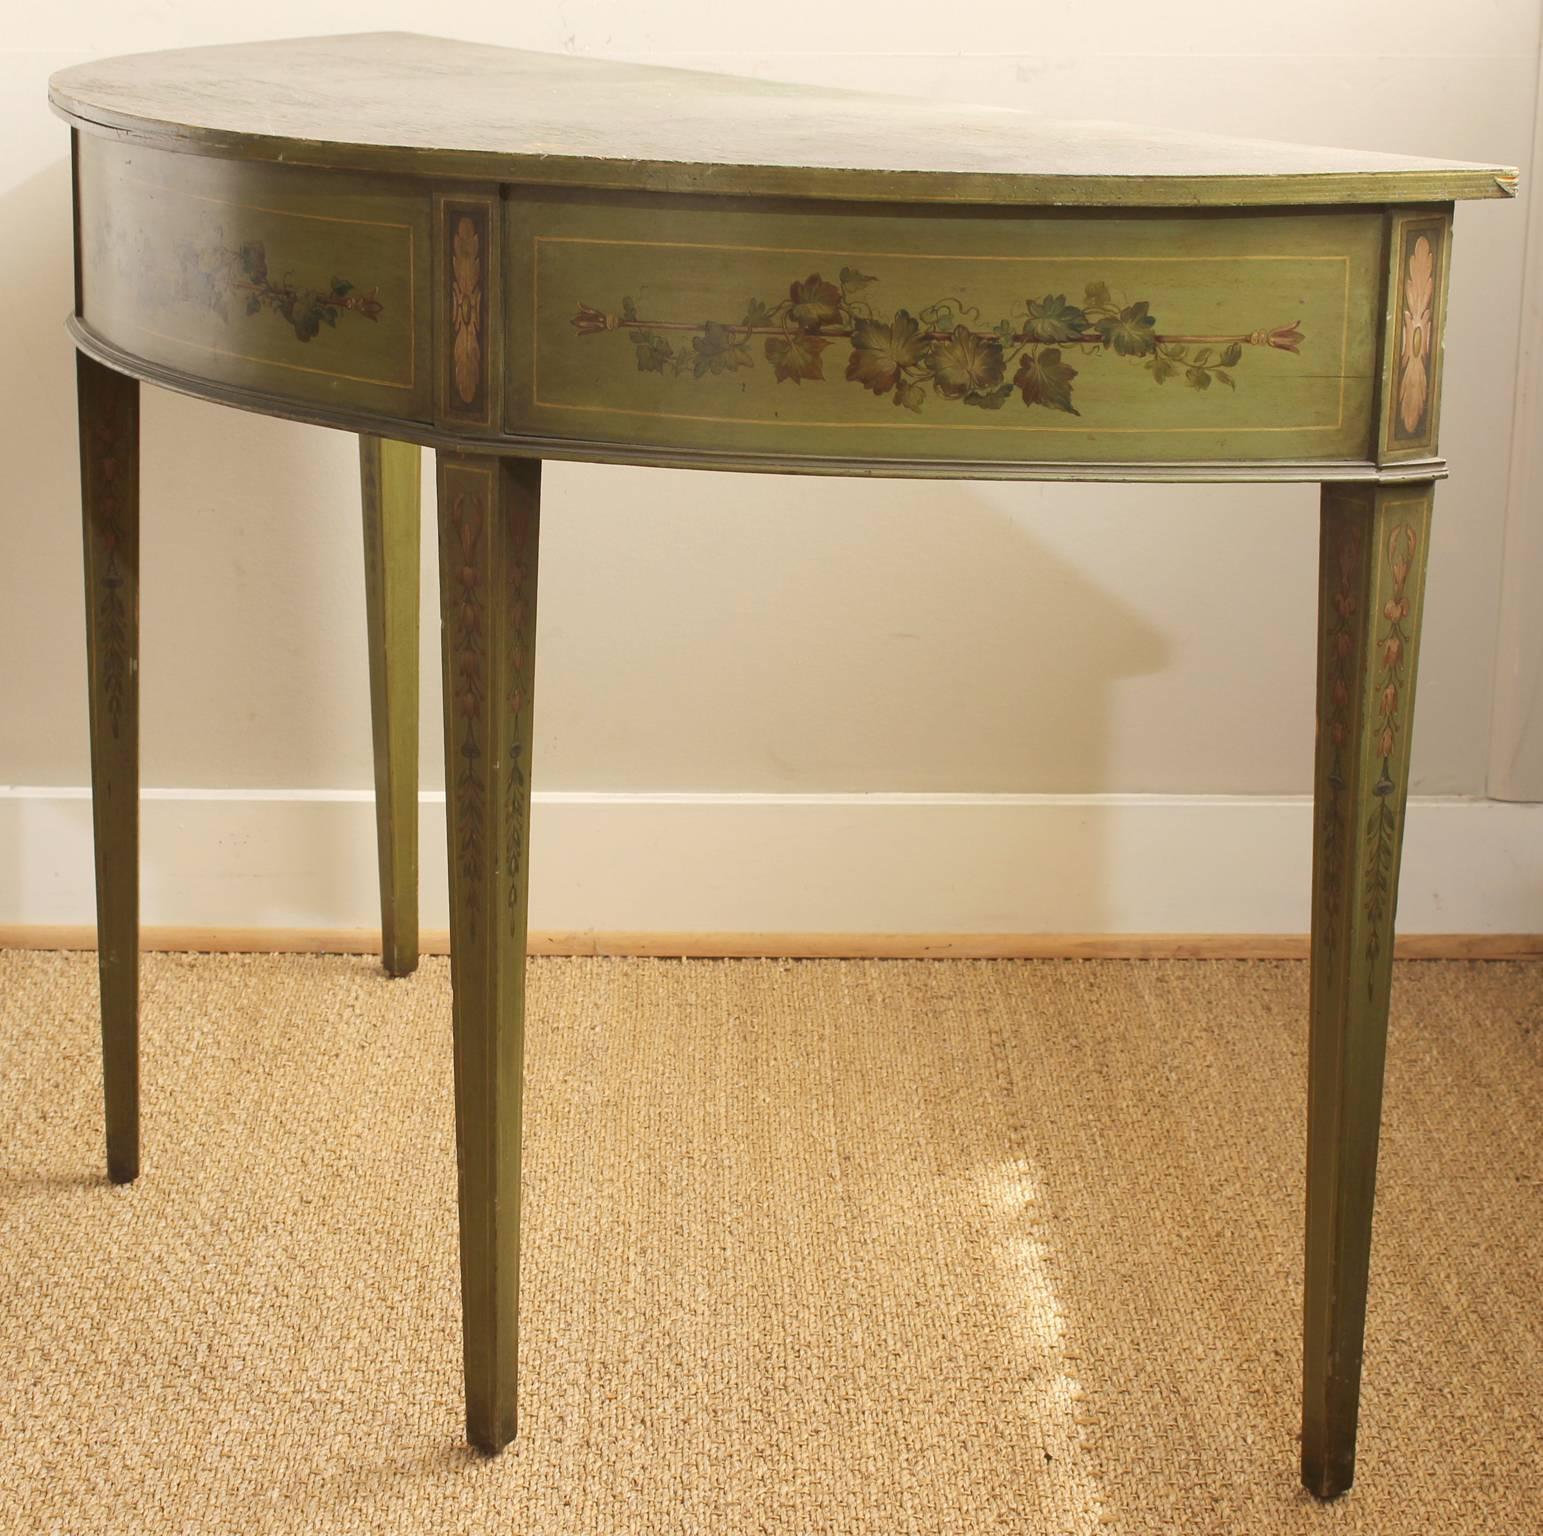 A 19th C. English paint decorated demilune console table in a lovely shade of green accented with trailing ivy, bellflowers and ribbons.  